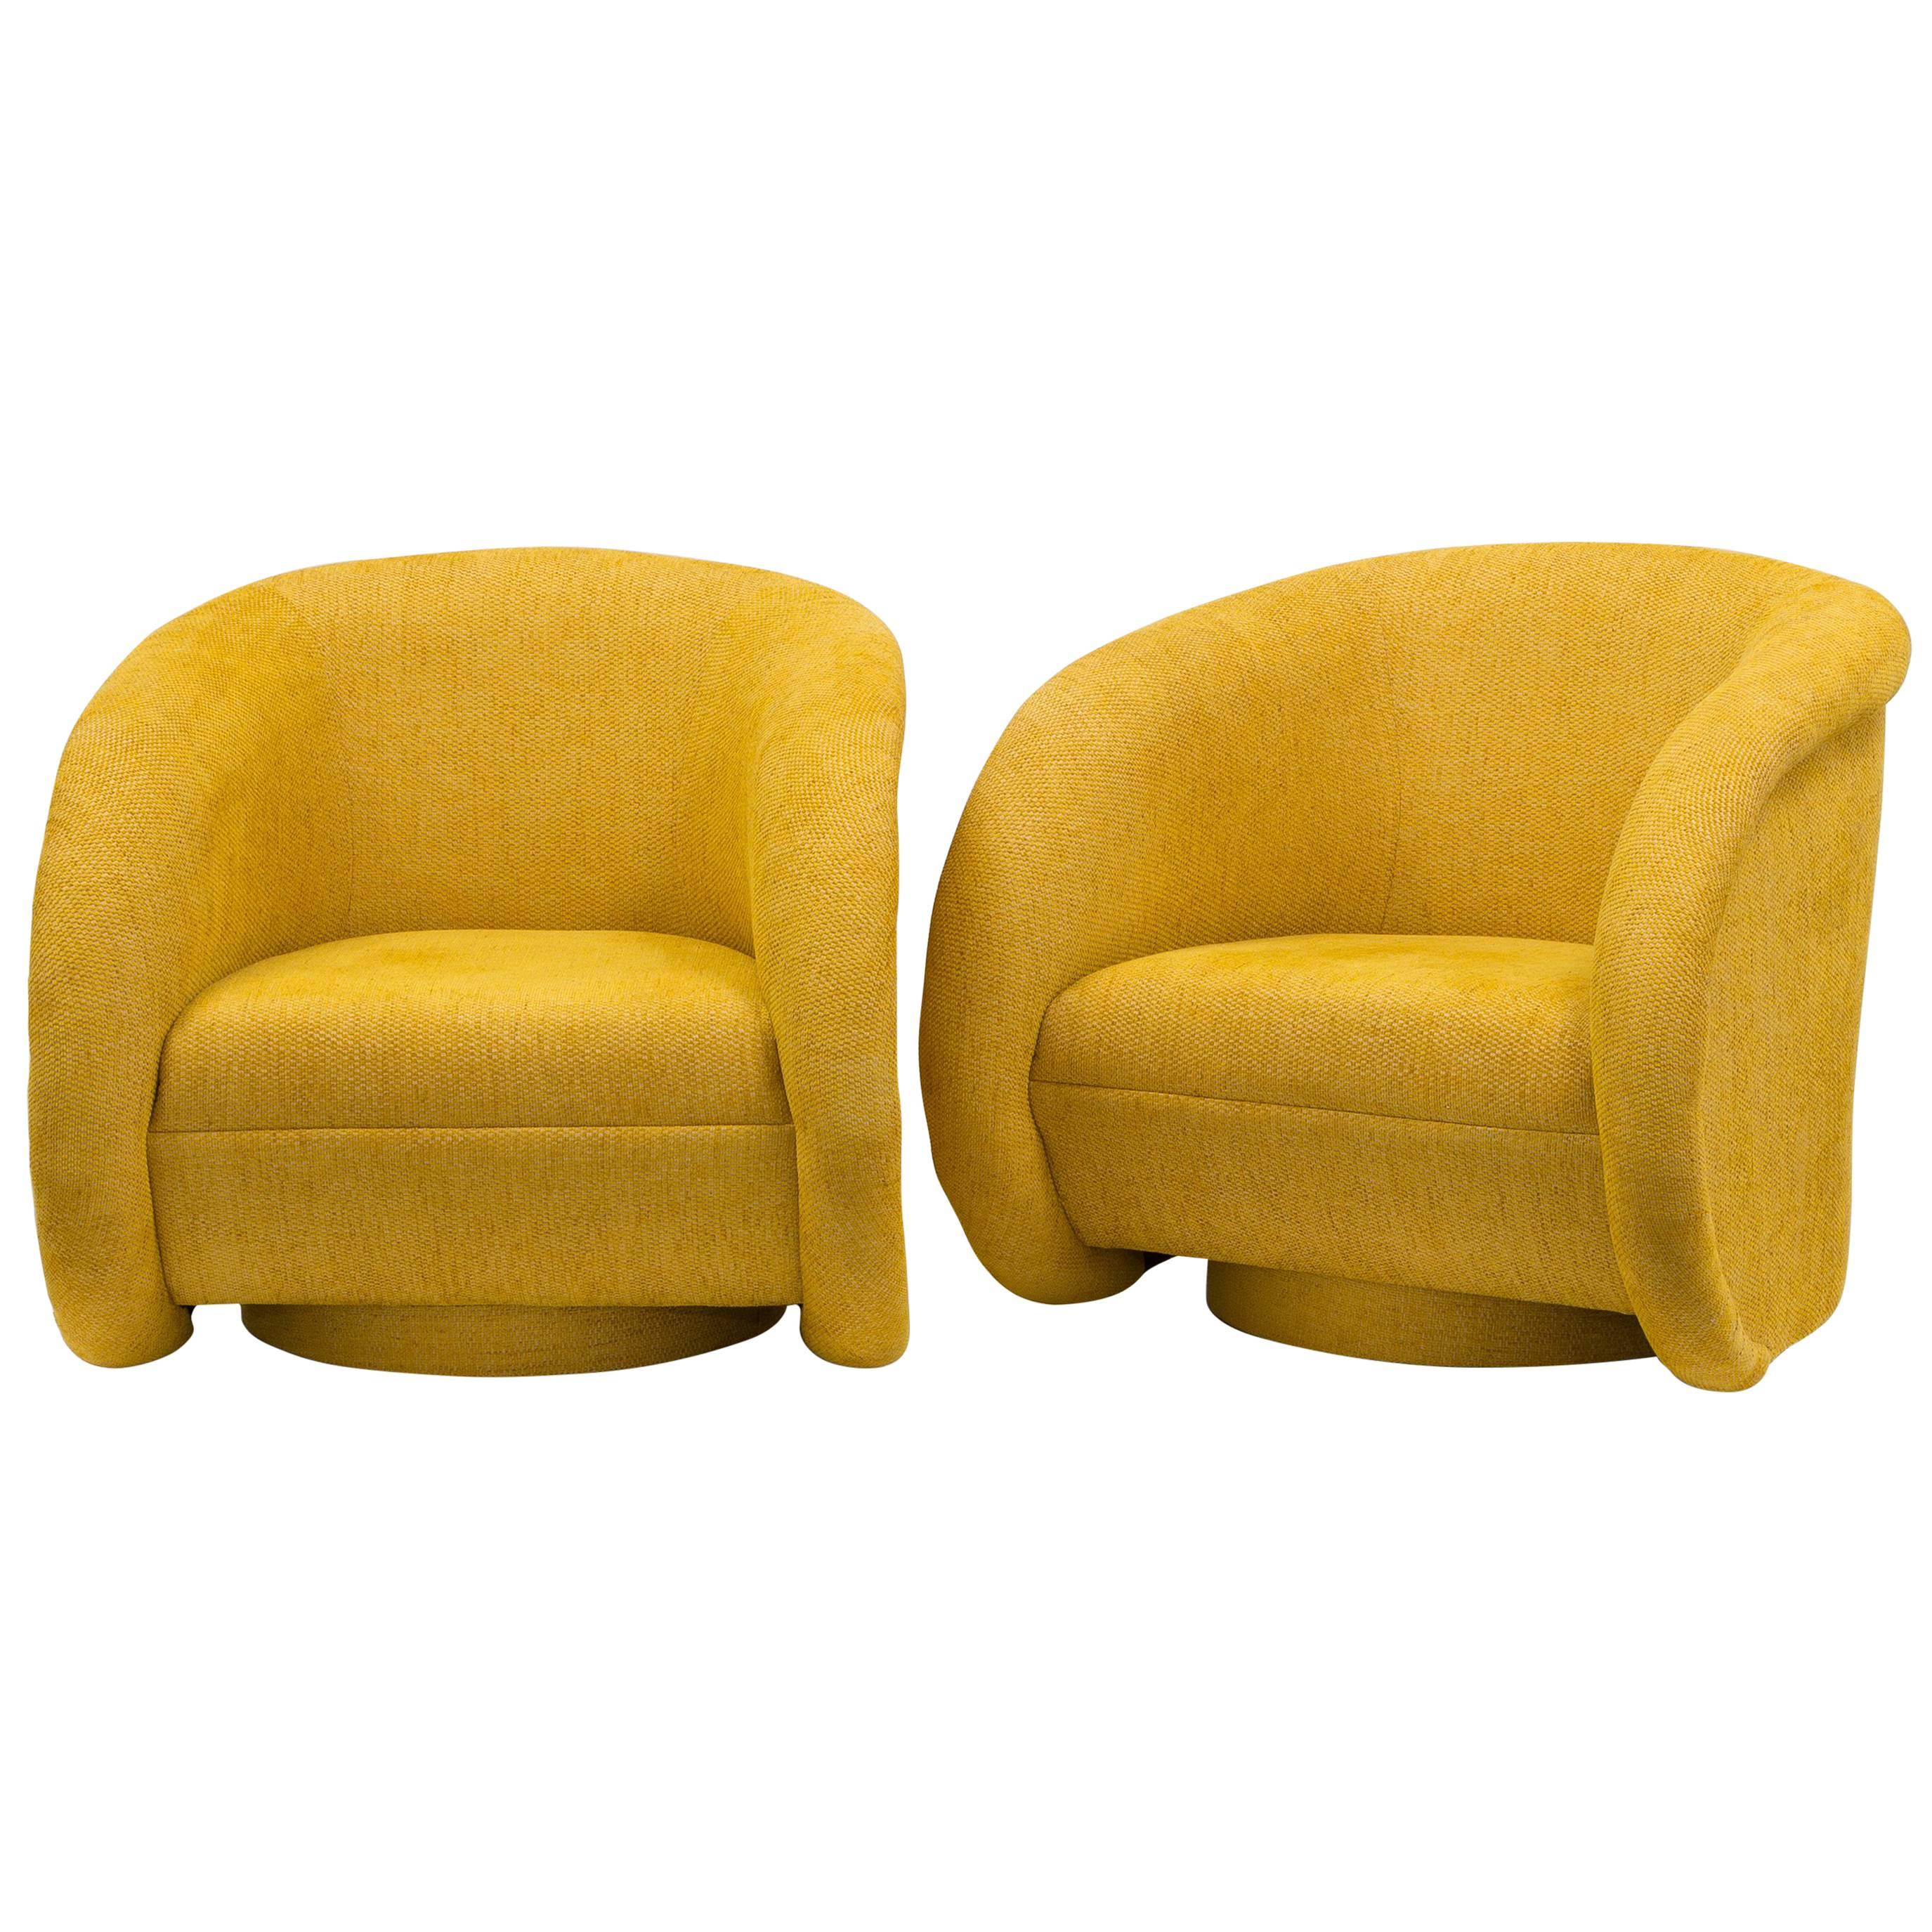 Large Pair of Upholstered Swivel Chairs, USA, Mid-1990s For Sale